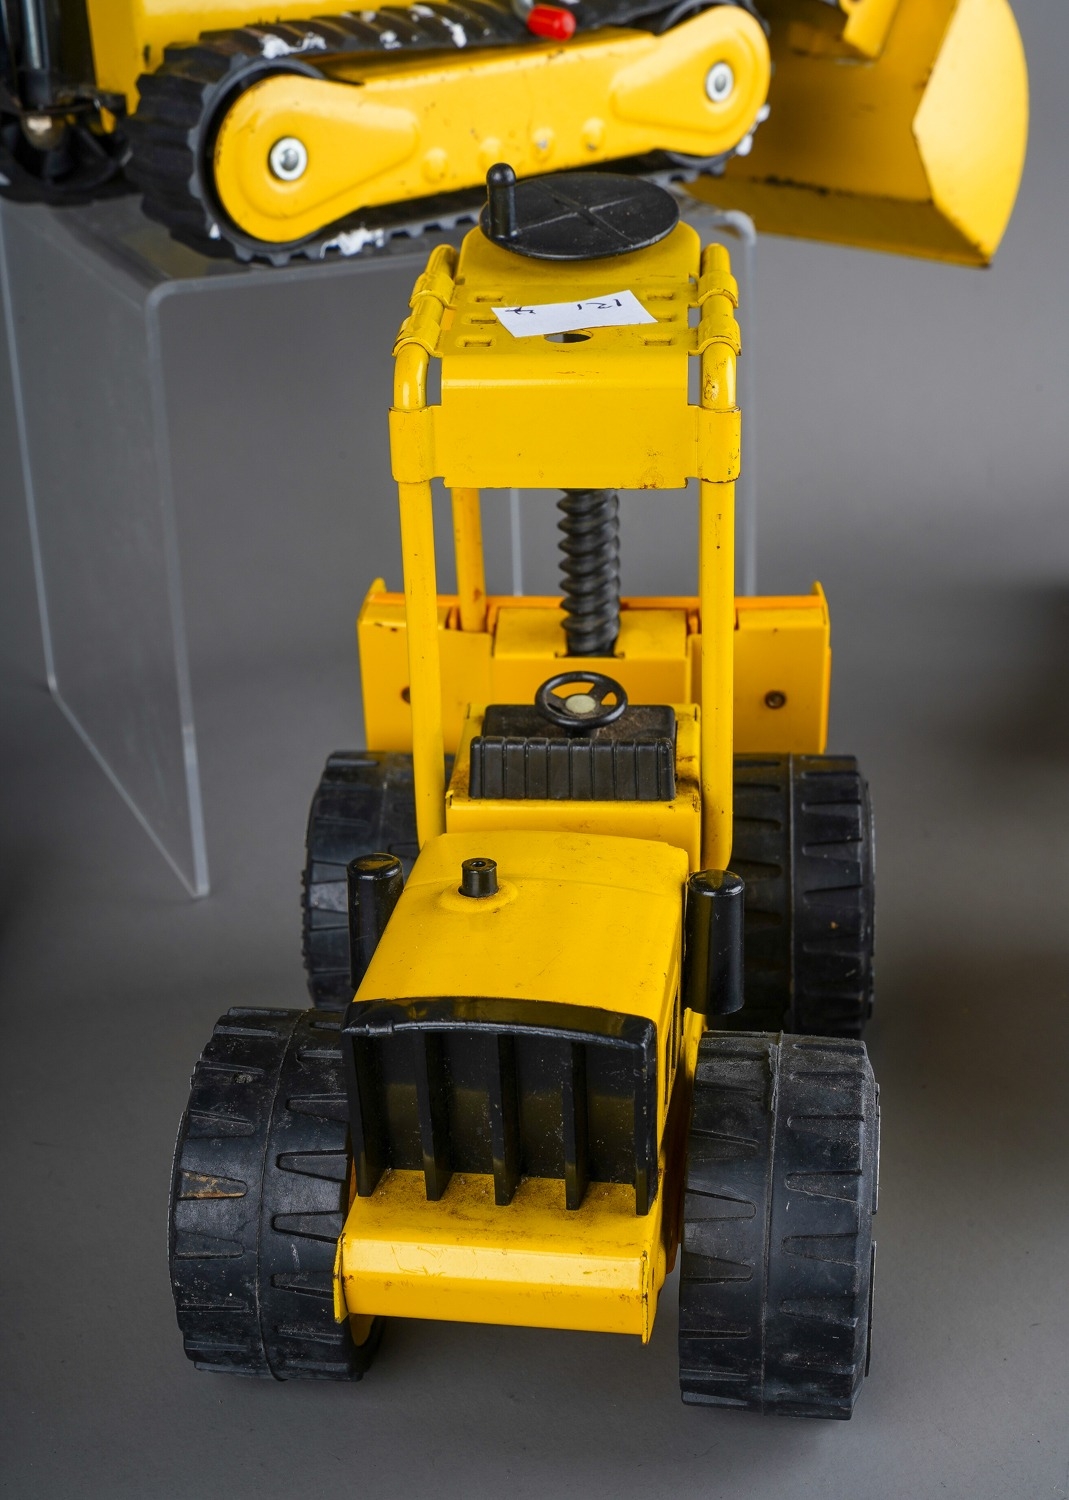 Tonka Toy. A group of medium sized construction vehicles in yellow, including scraper and forklift - Image 2 of 8